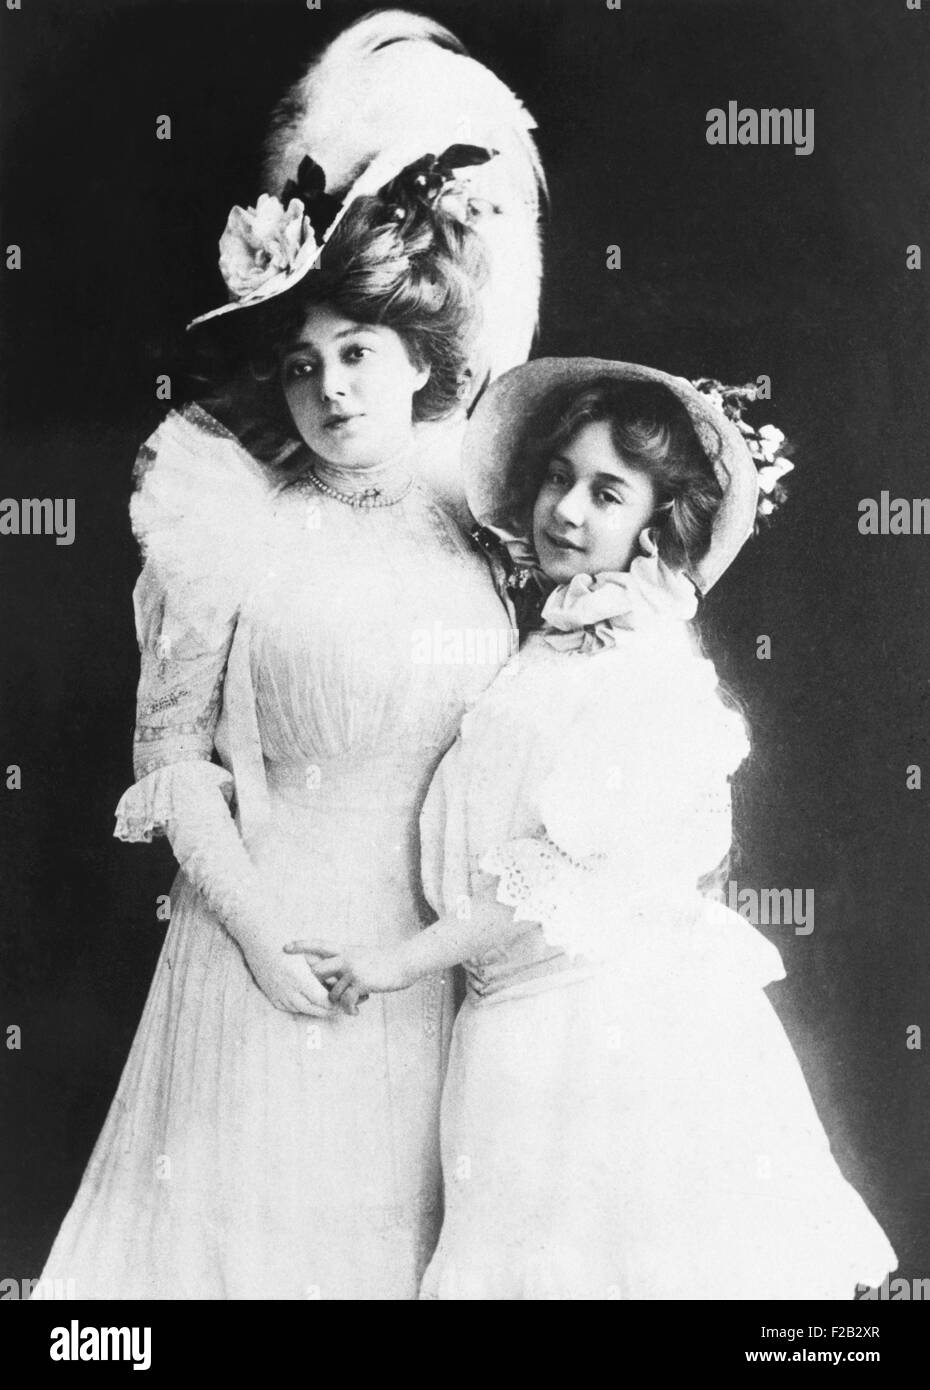 Famous Ziegfeld star Anna Held with her daughter Liane Carrera, ca. 1907. Liane was born in 1895, during Held's marriage to Uruguayan playboy Maximo Carrera. Liane became an actress and producer, and was sometimes billed as Anna Held, Jr. (CSU_2015_7_303) Stock Photo